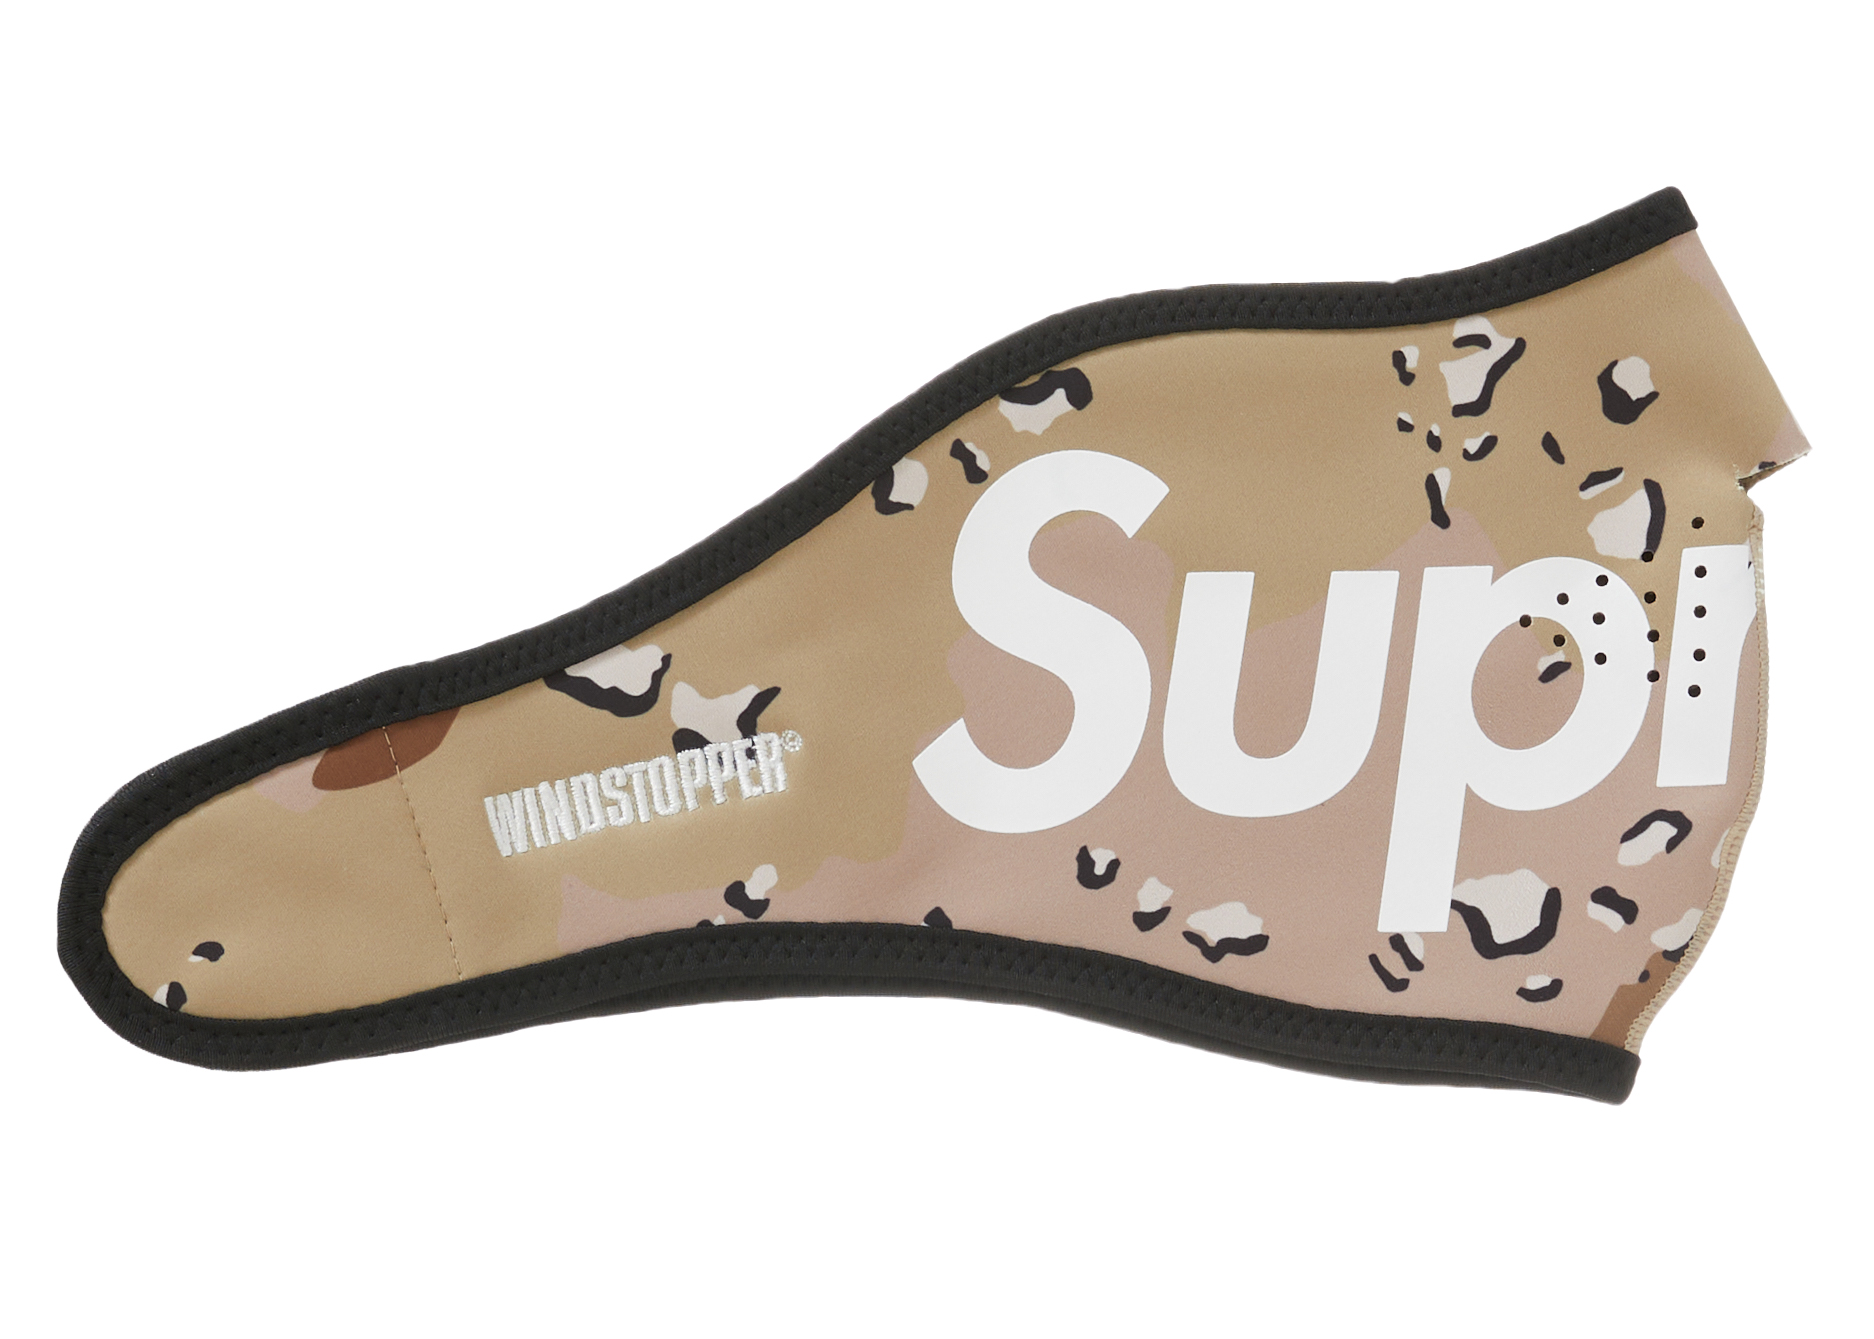 WINDSTOPPER Facemask Chocolate Chip Camo